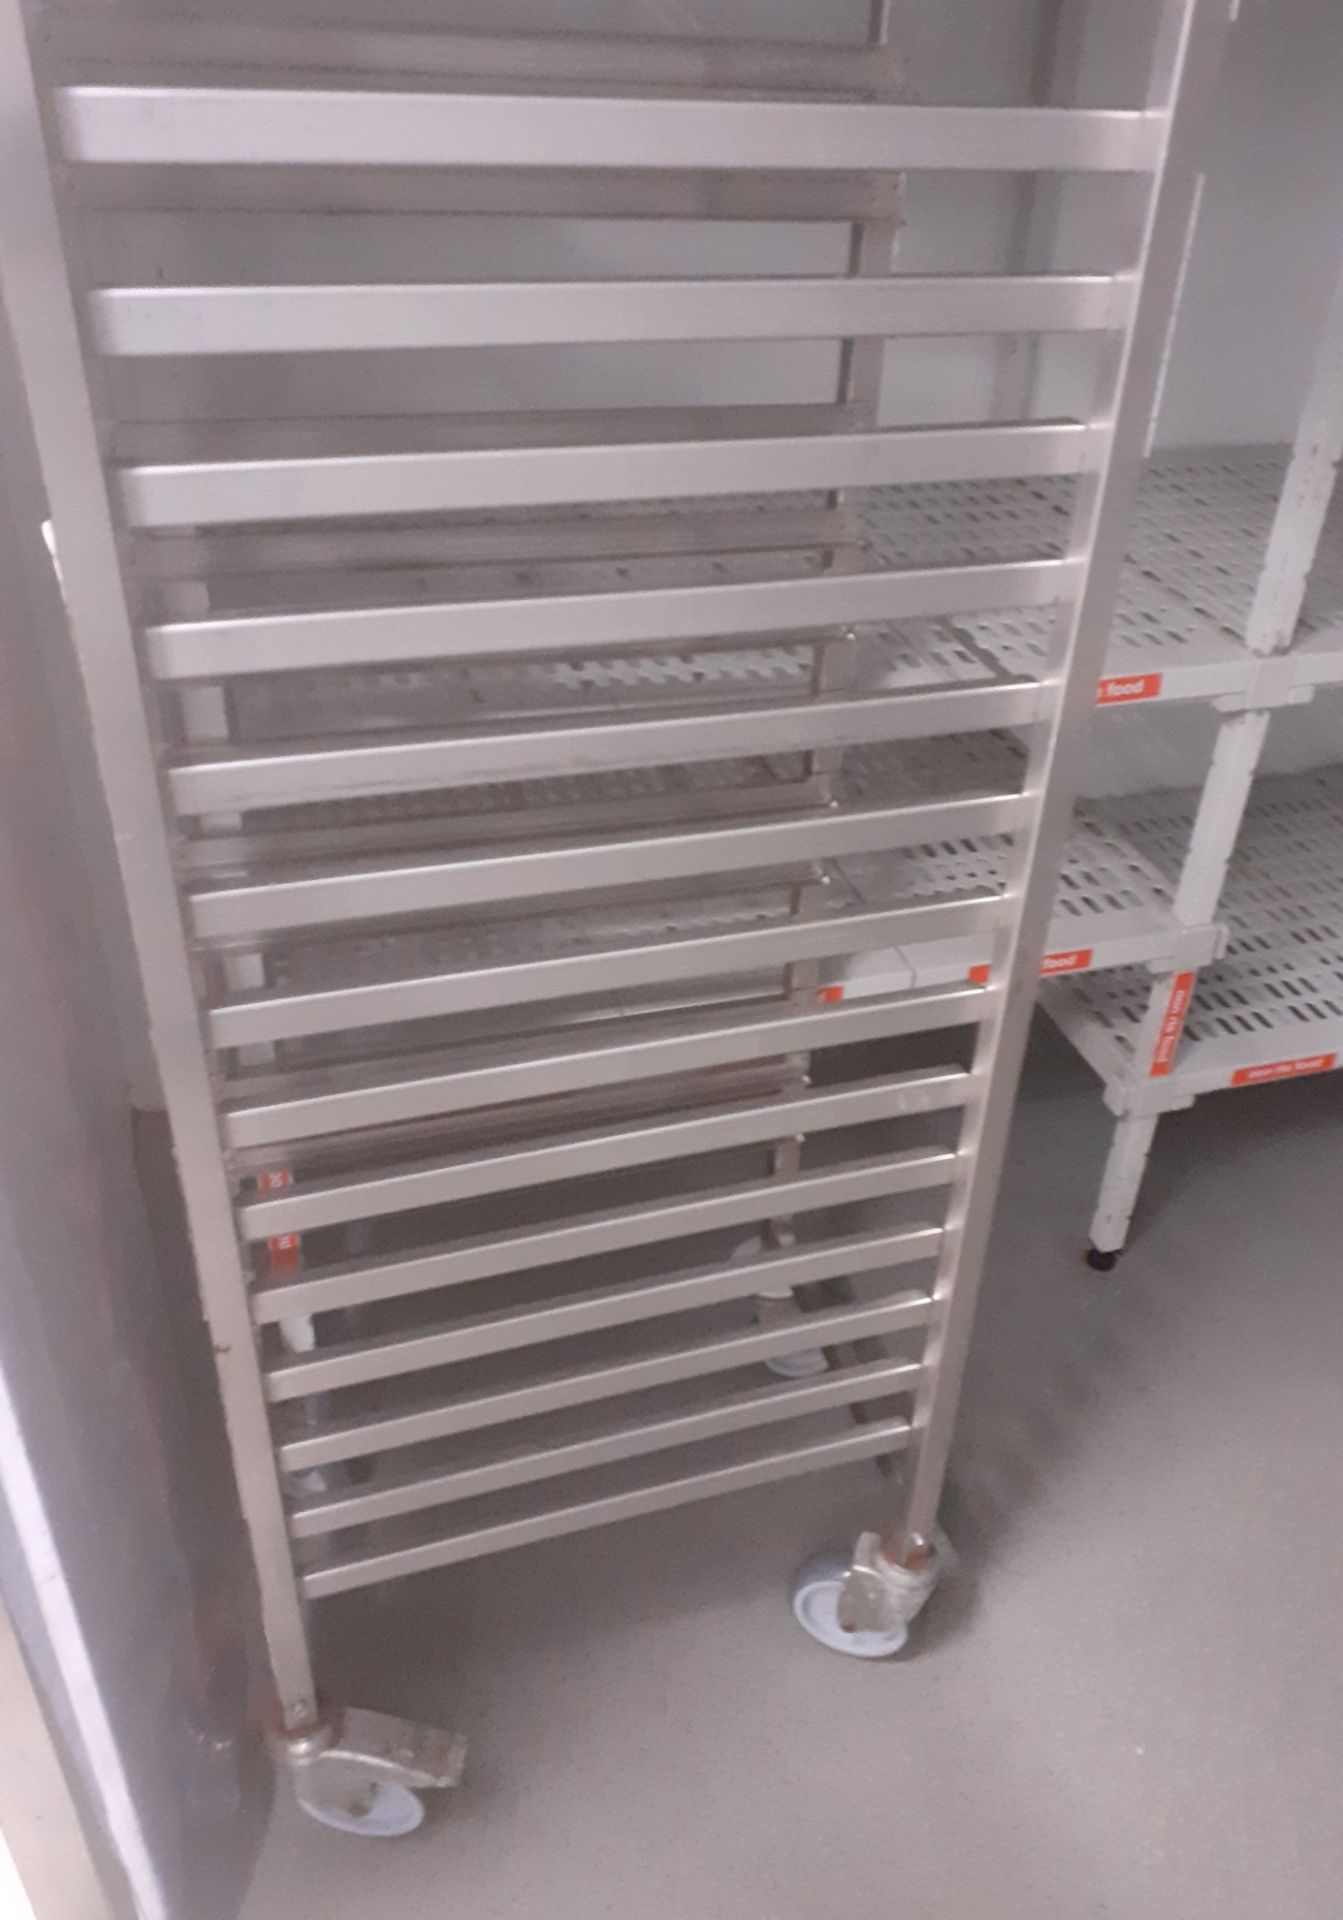 1 x Stainless Steel 20 Tier Commercial Kitchen Food Tray Rack - CL582 - Location: London EC4V